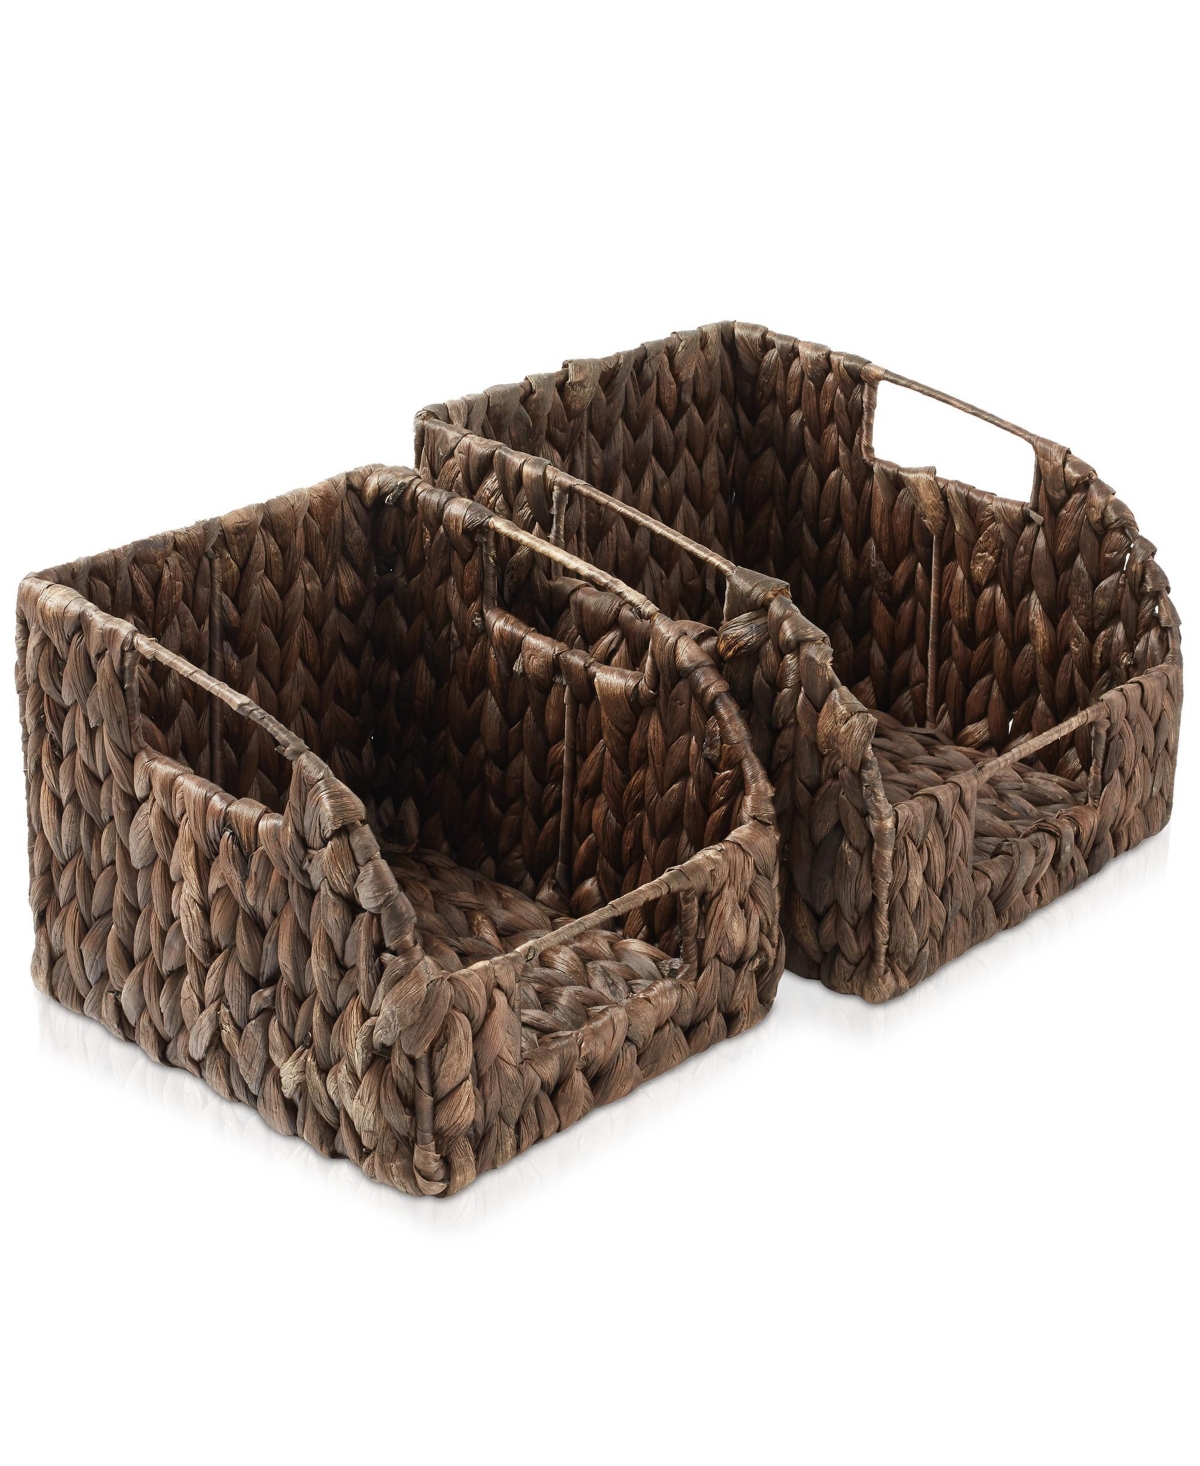 (Set of 2) Water Hyacinth Pantry Baskets with Handles - Natural, Medium and Large Size Woven Storage Baskets for Kitchen Shelves - Espresso